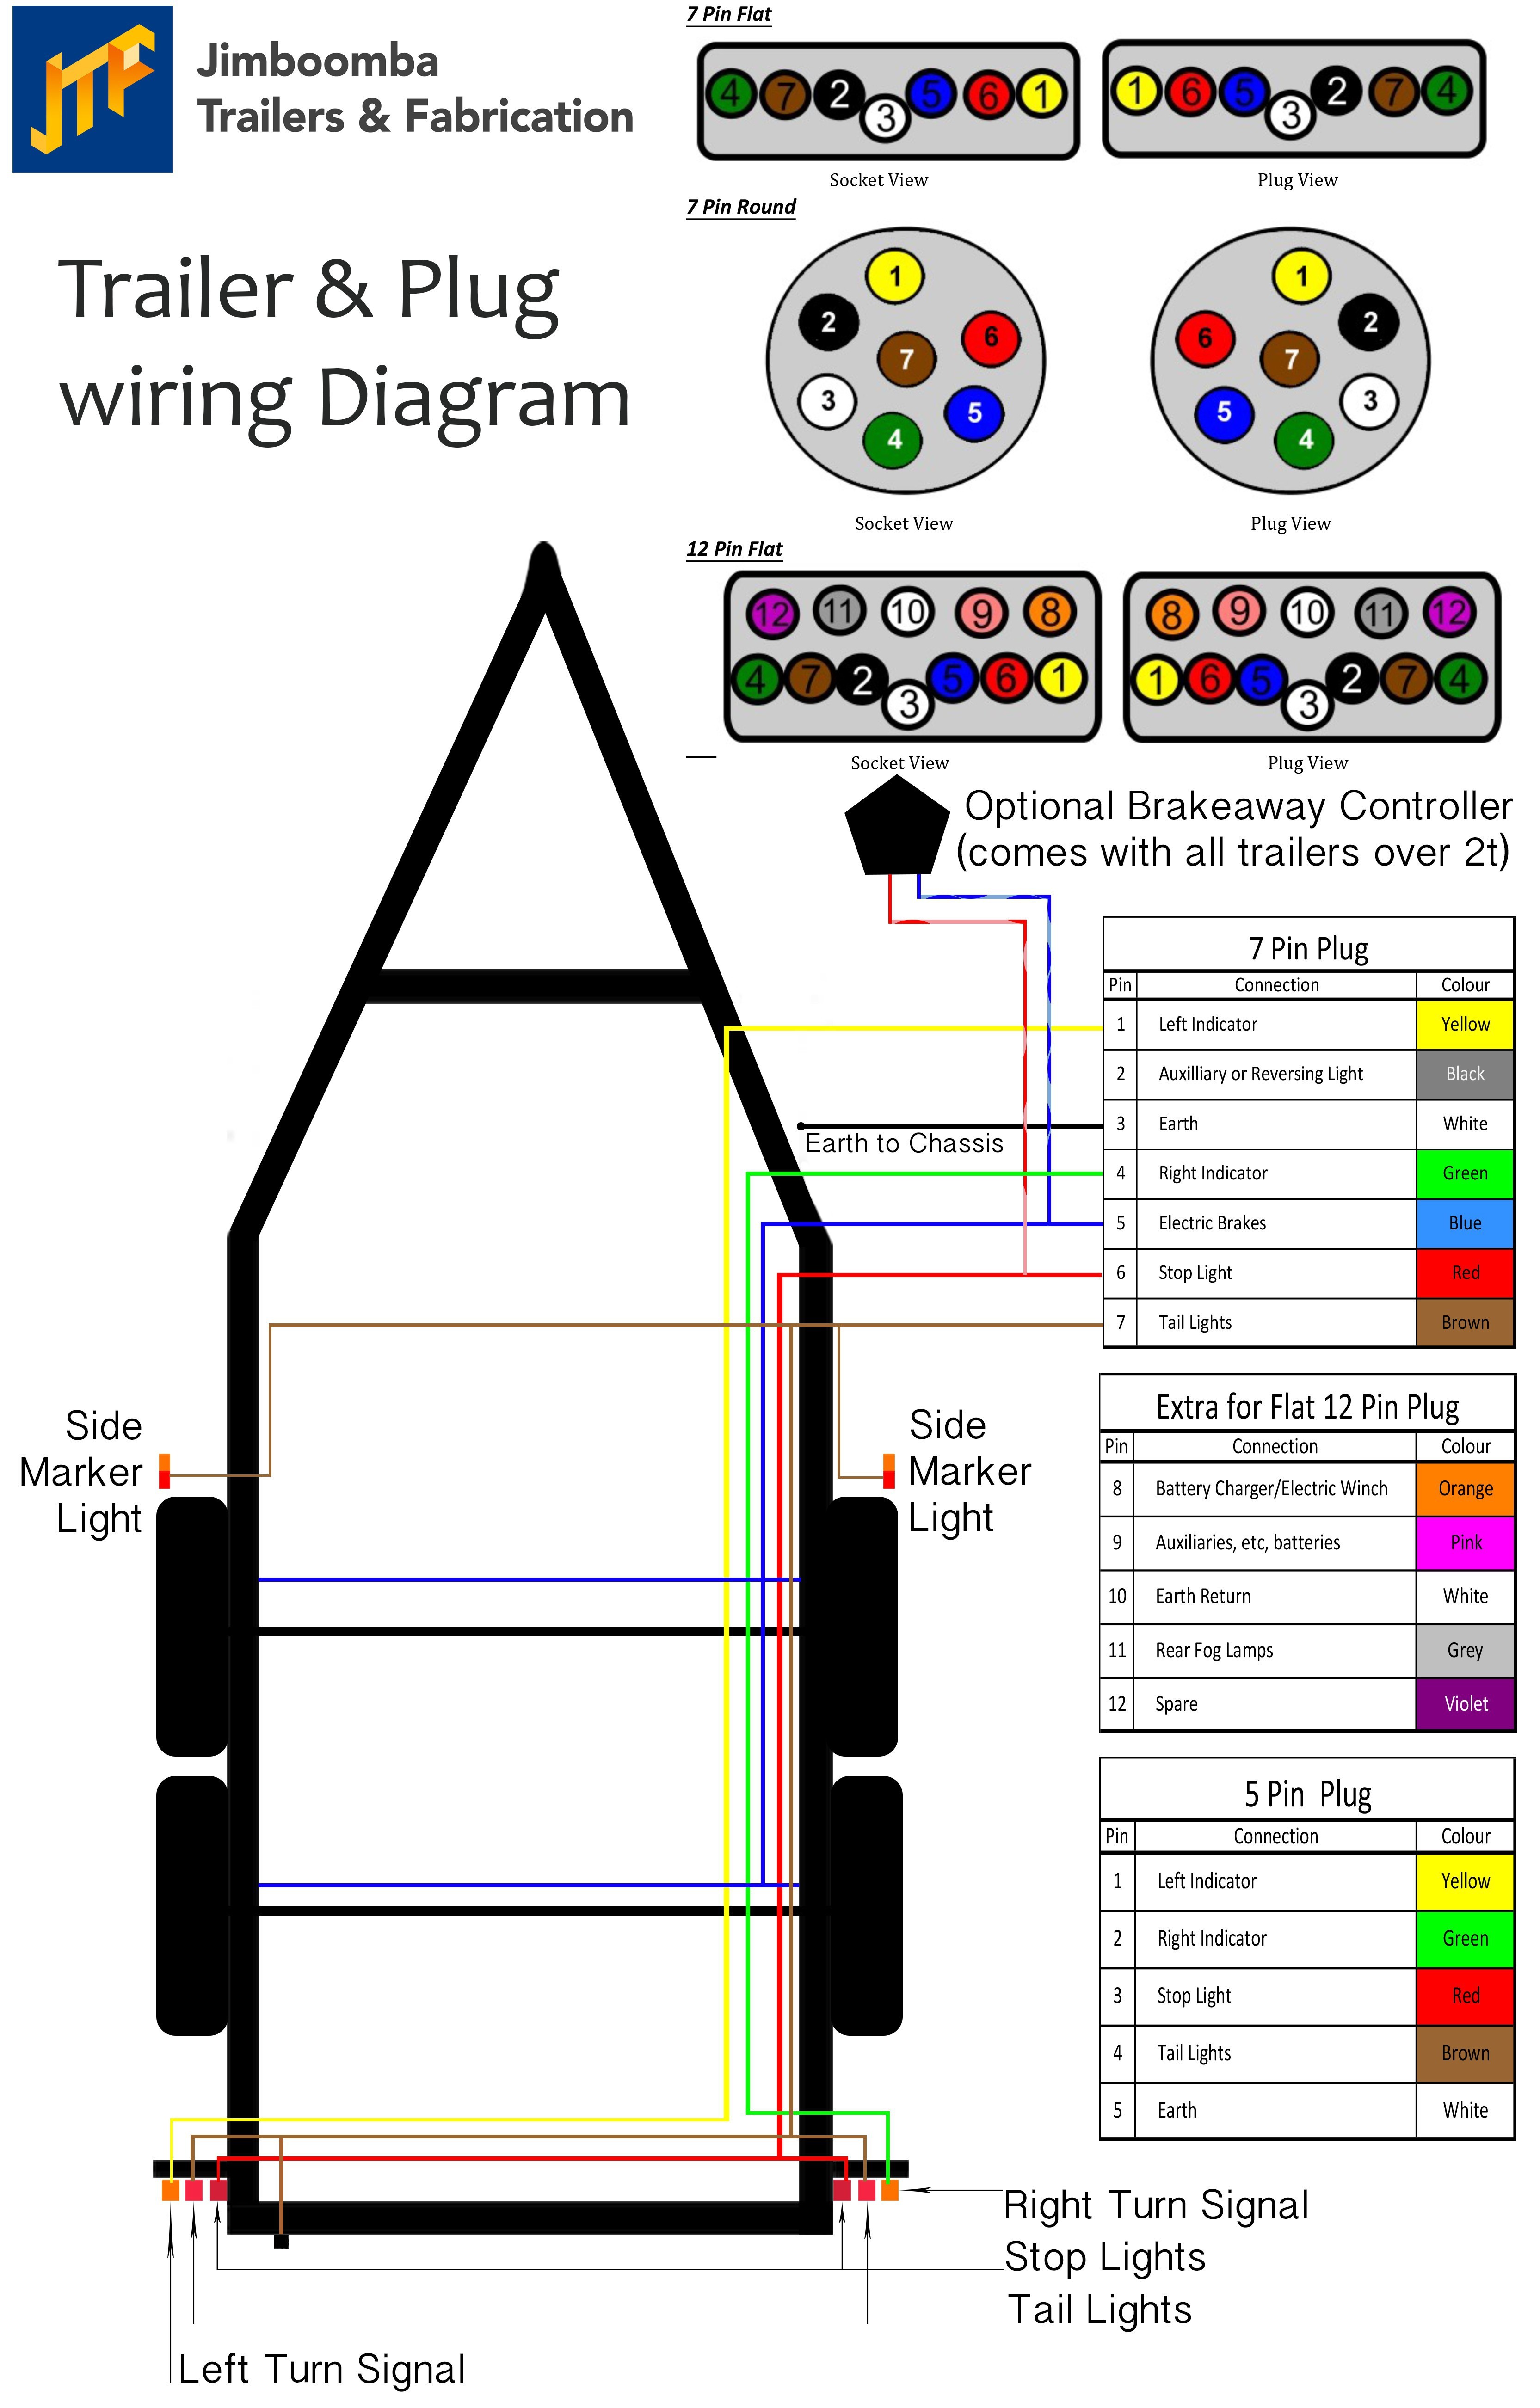 Tail Light Wiring Diagram Chevy Luxury Tail Light Wiring Diagram 1996 Chevy Truck Wiring Diagrams